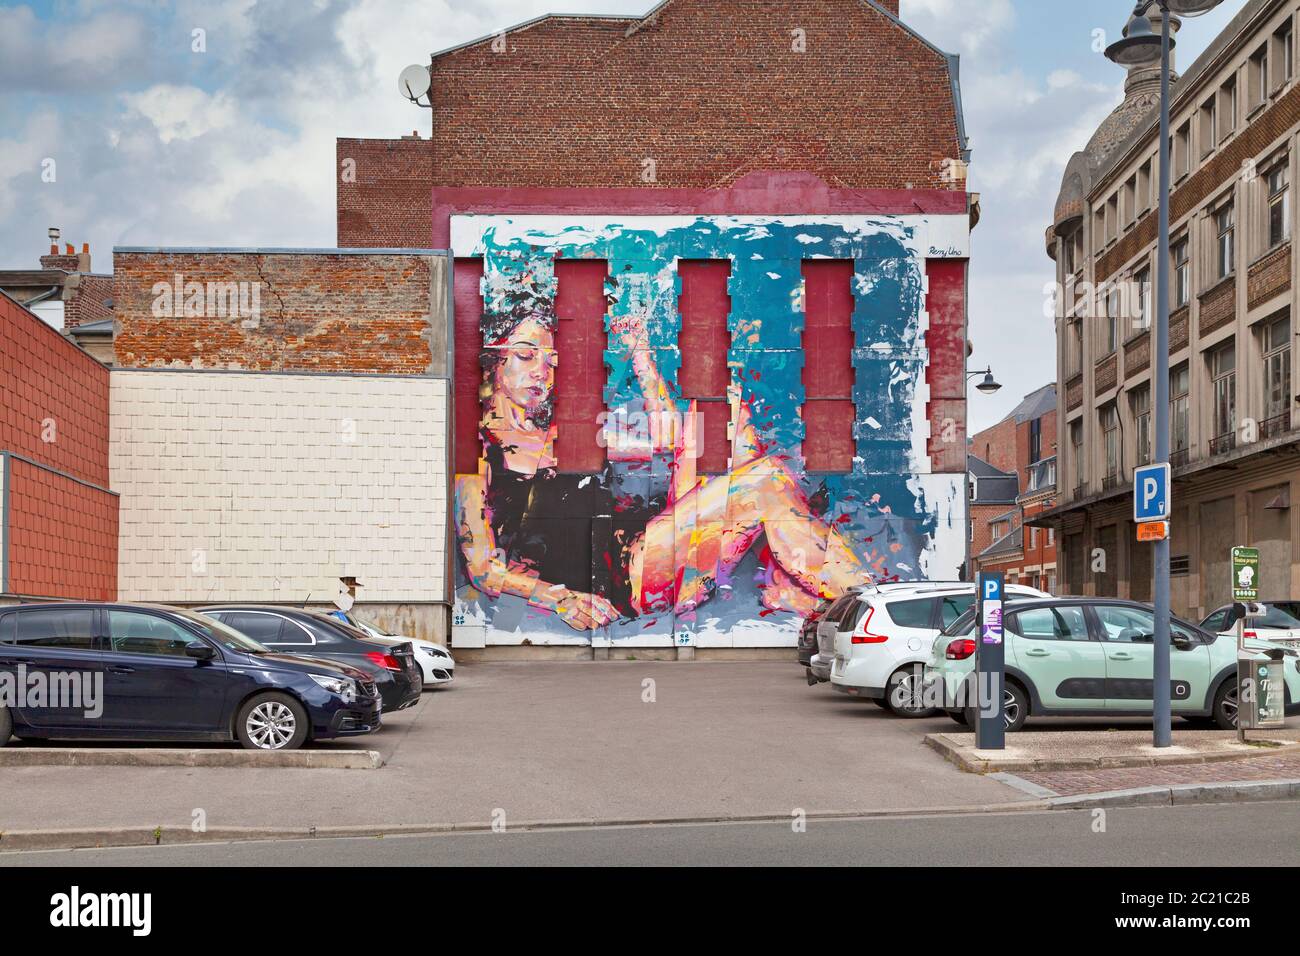 Saint-Quentin, France - June 10 2020: Mural painted on a wall of a parking lot in the city center by artist Remy Uno. Stock Photo